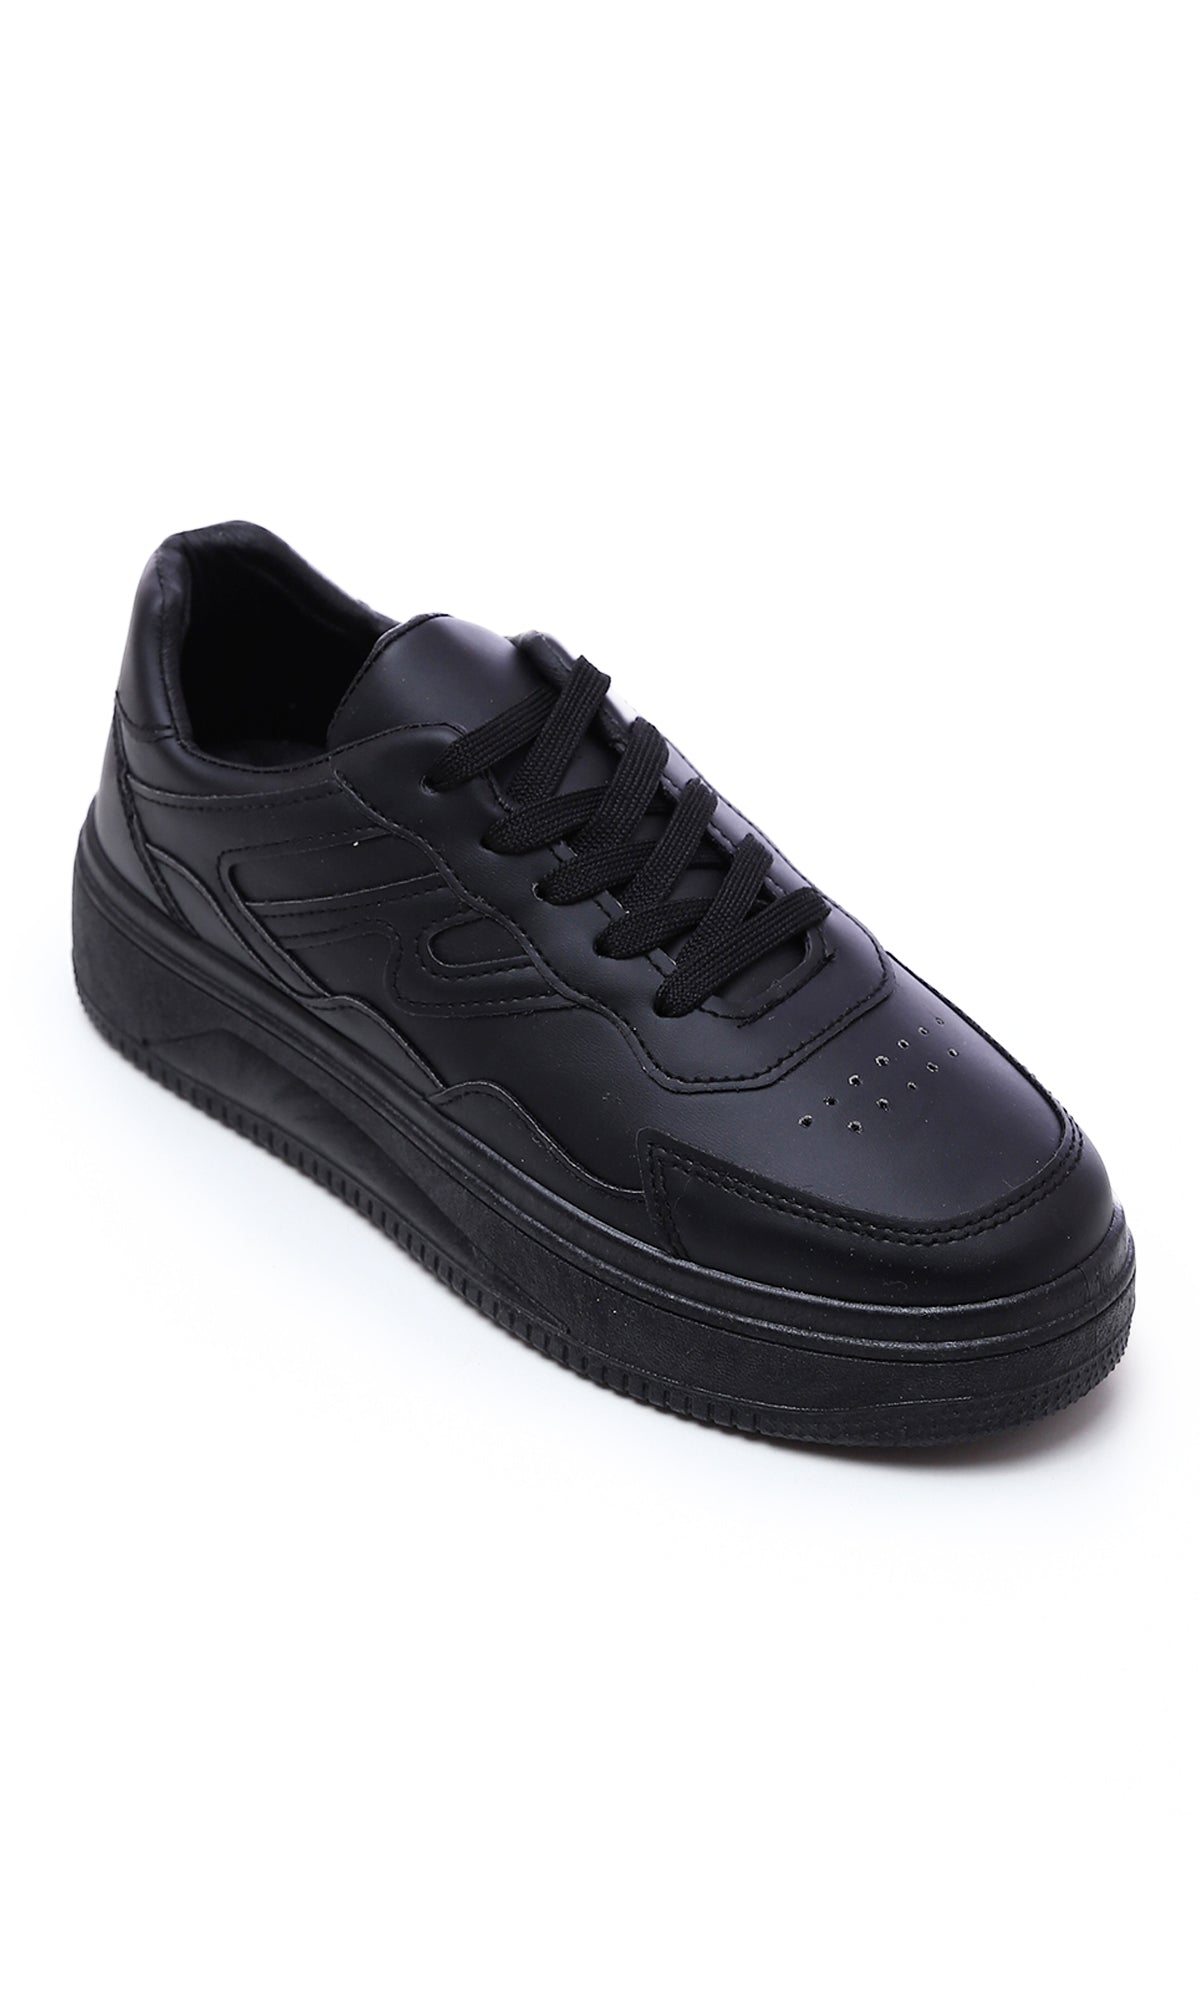 O177891 High-Sole Lace Up Casual Sneakers - Black